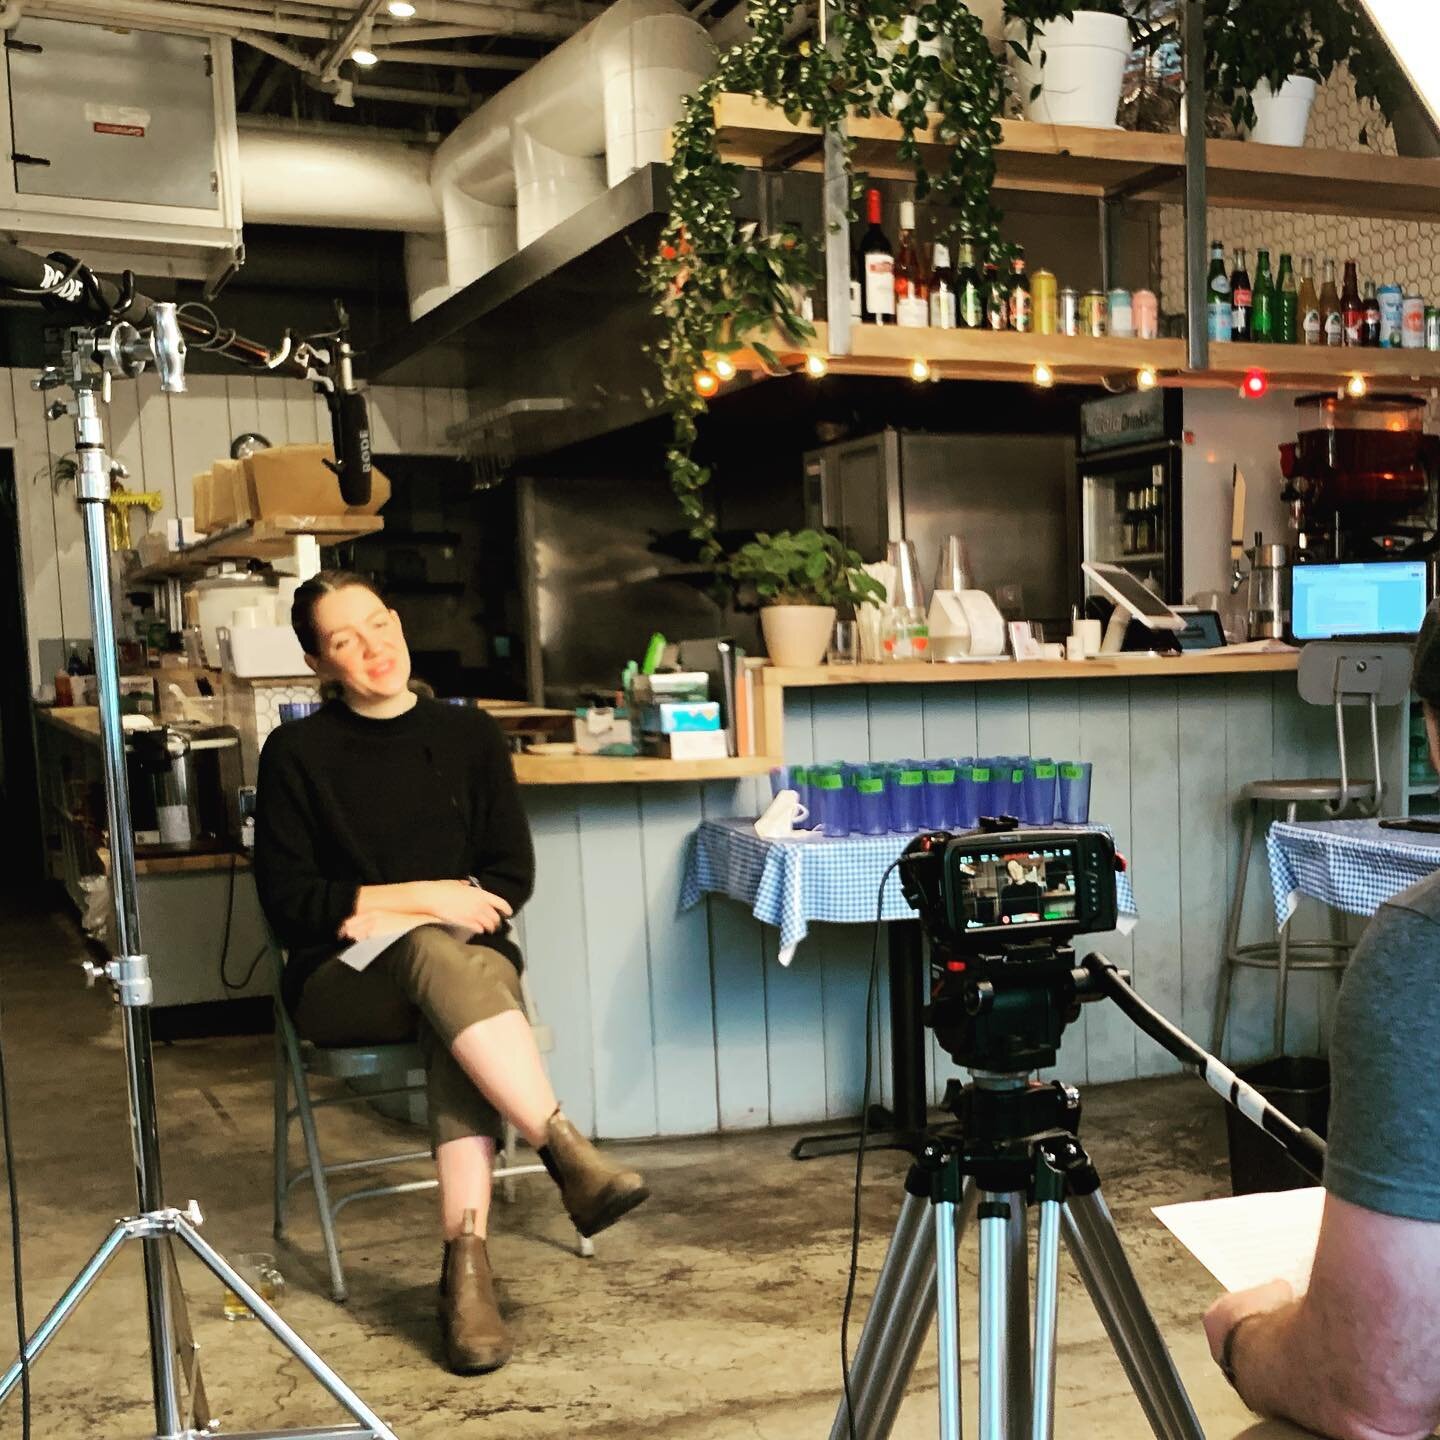 Interviewing @kt_connors of @oregonindprestaurants for our Documentary. Very insightful interview... can&rsquo;t wait to share it. #pdxfilmmaking #documentaryfilm #eatlocal #orderlocal